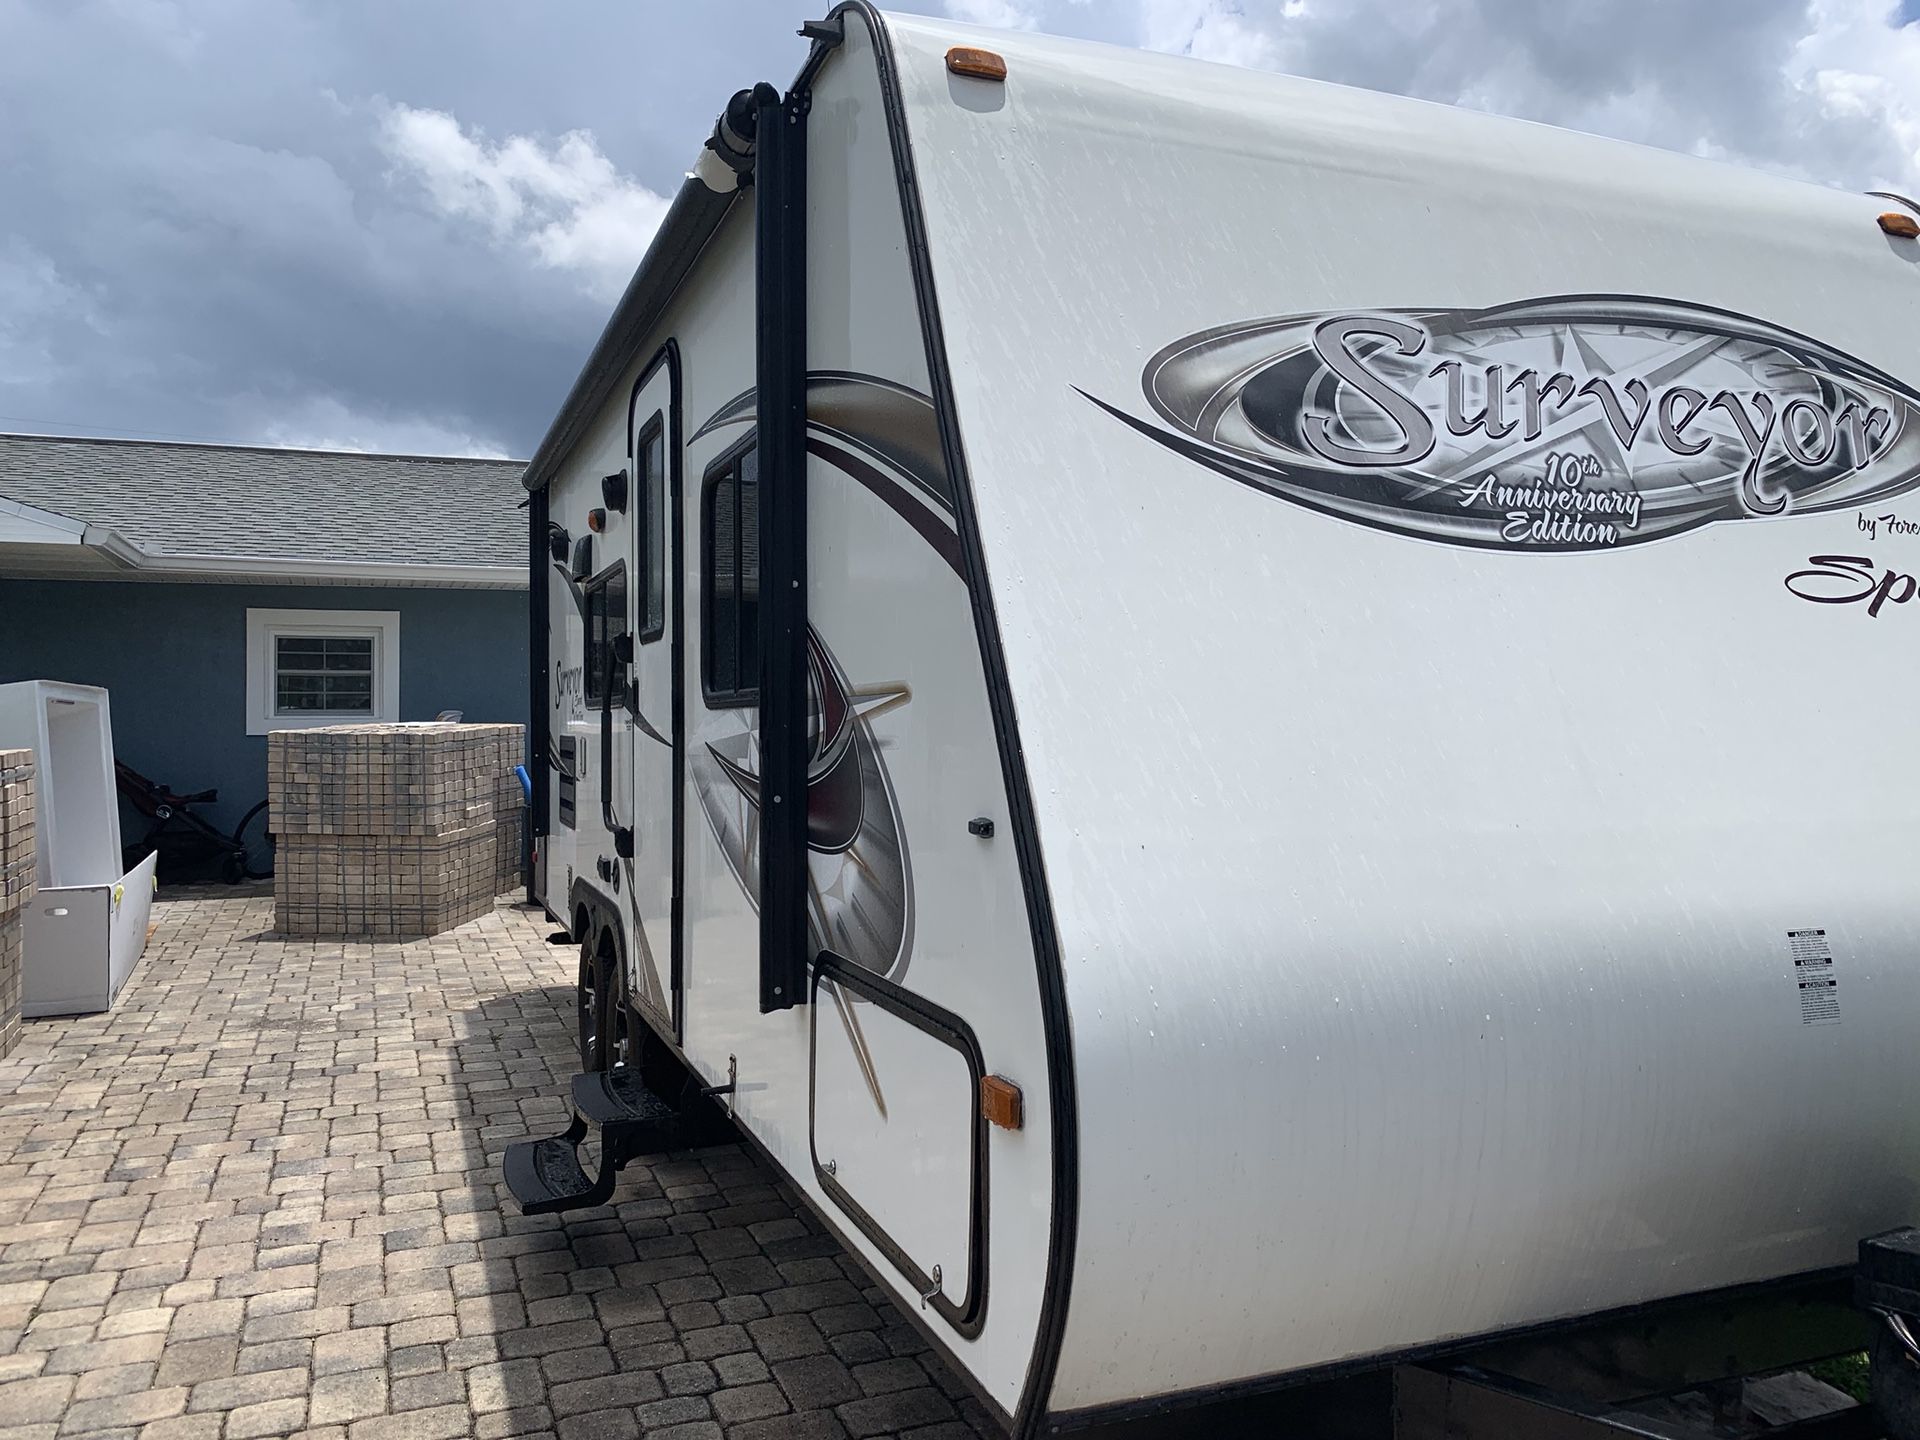 2012 camper. 24’. Great condition